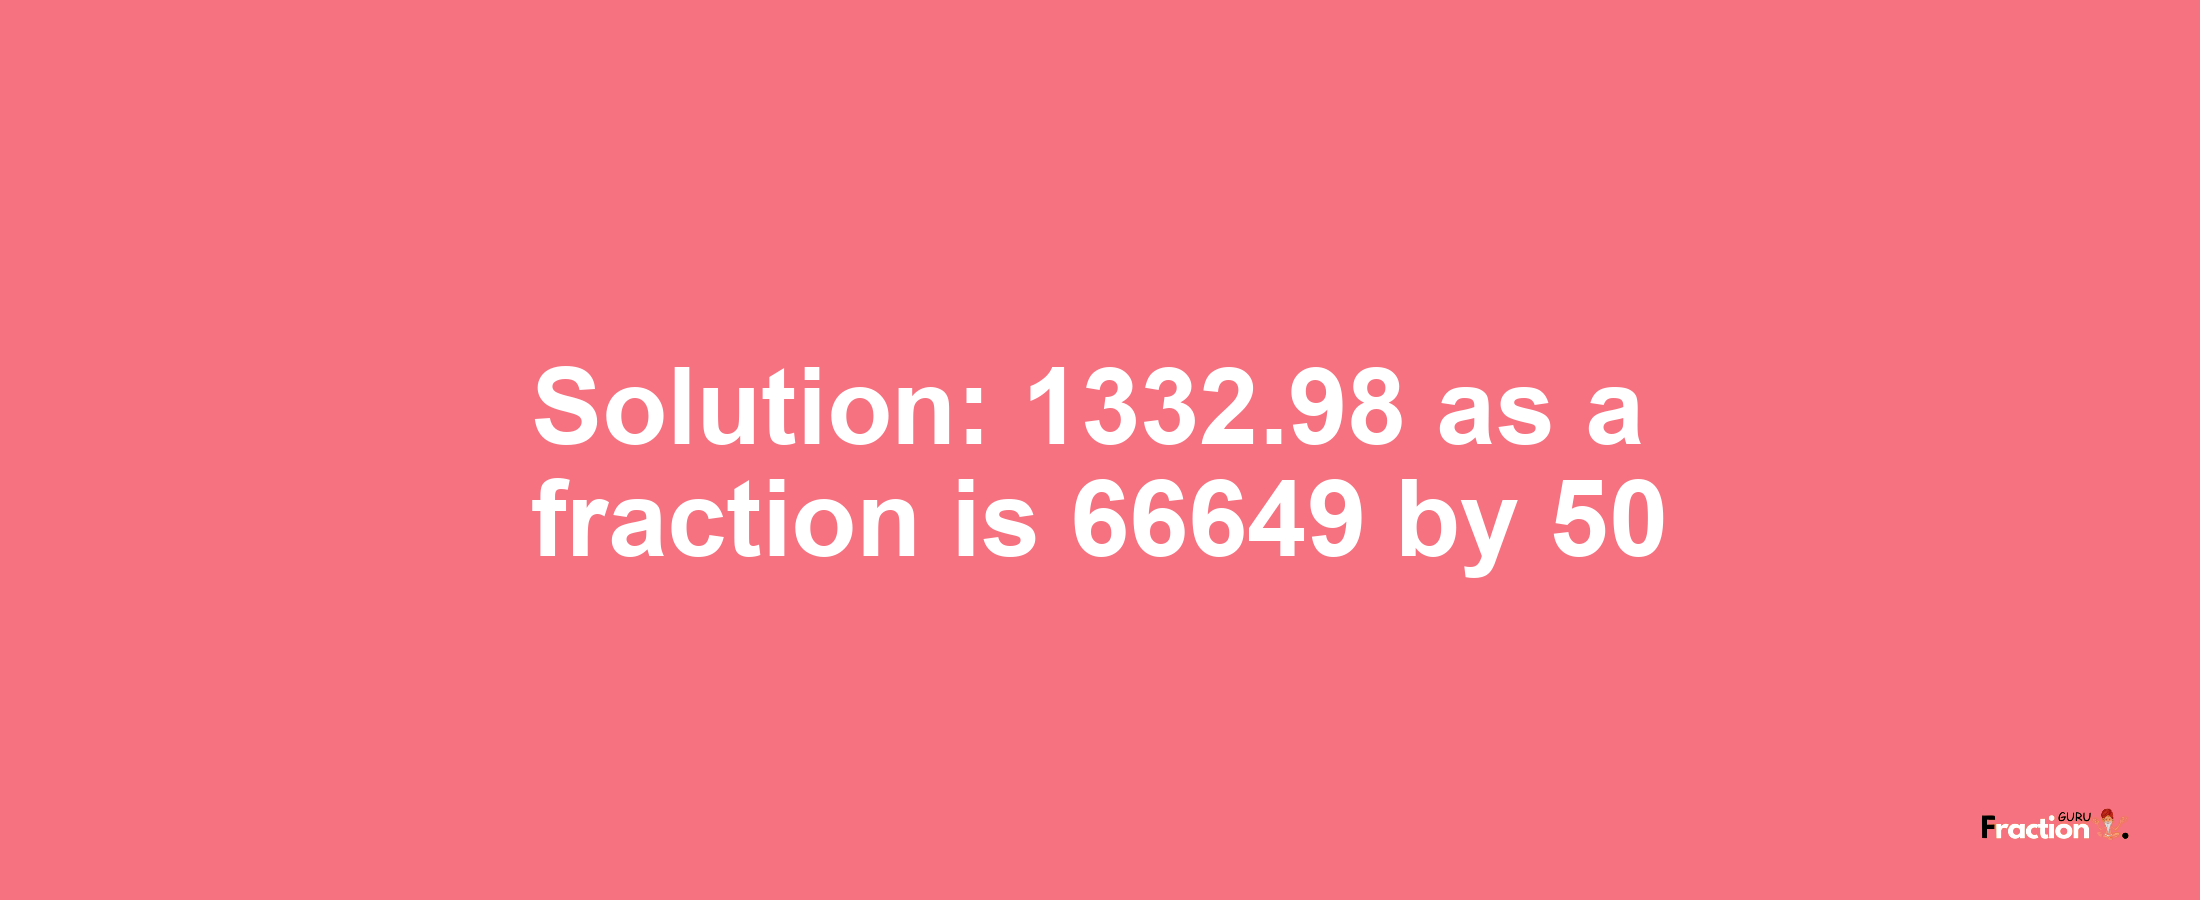 Solution:1332.98 as a fraction is 66649/50